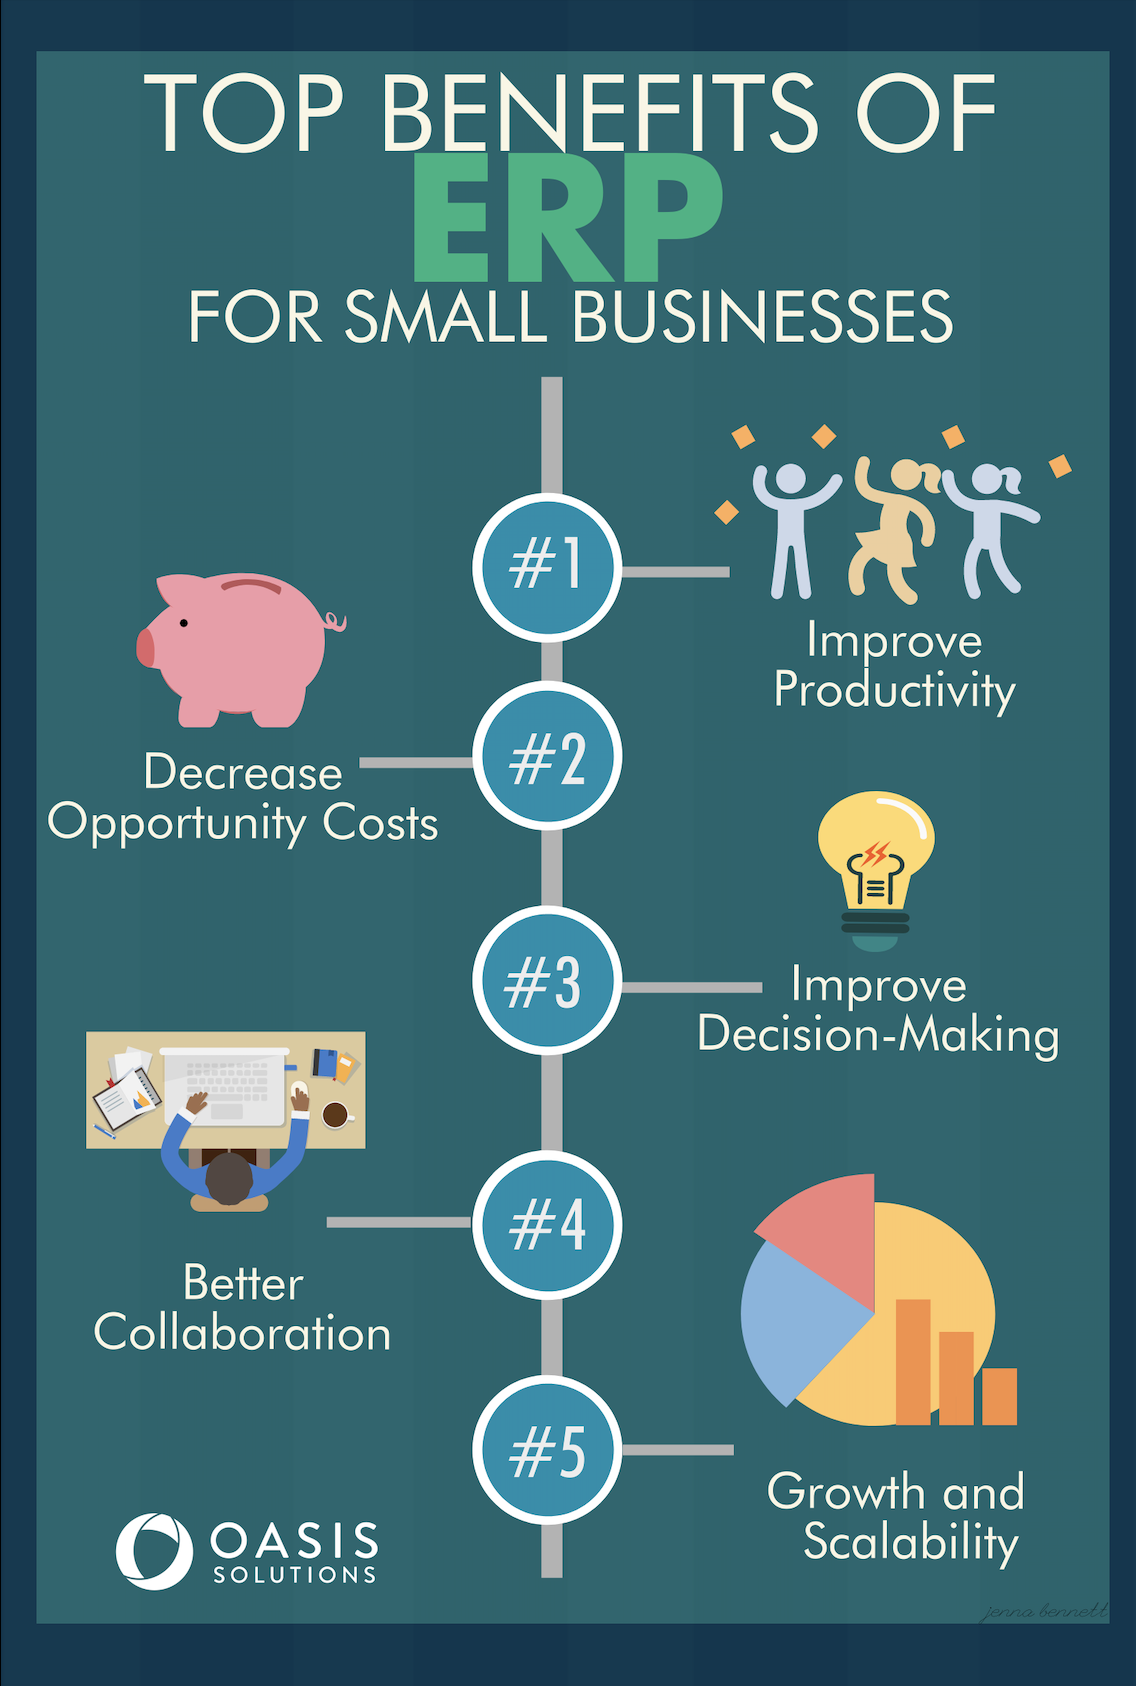 Top Benefits of ERP for Small Businesses